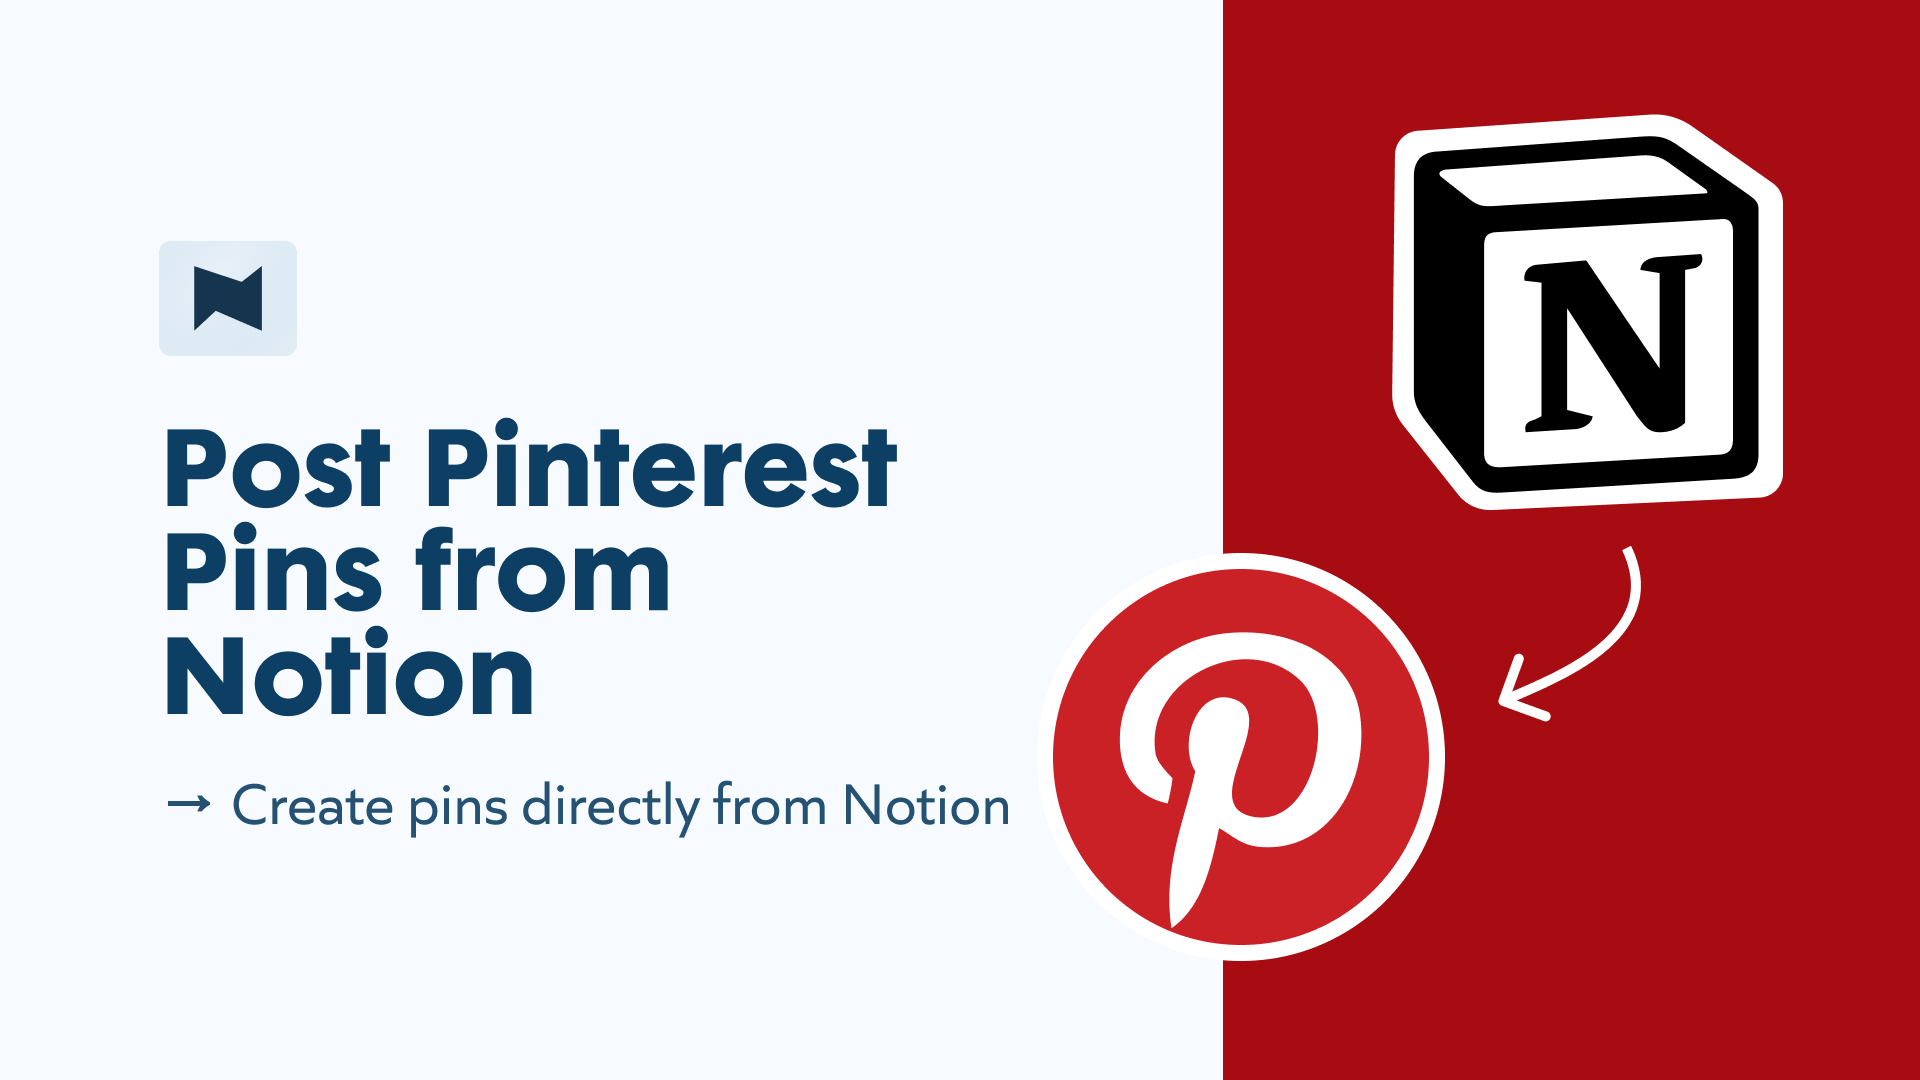 How to add Pins to Pinterest boards using Notion